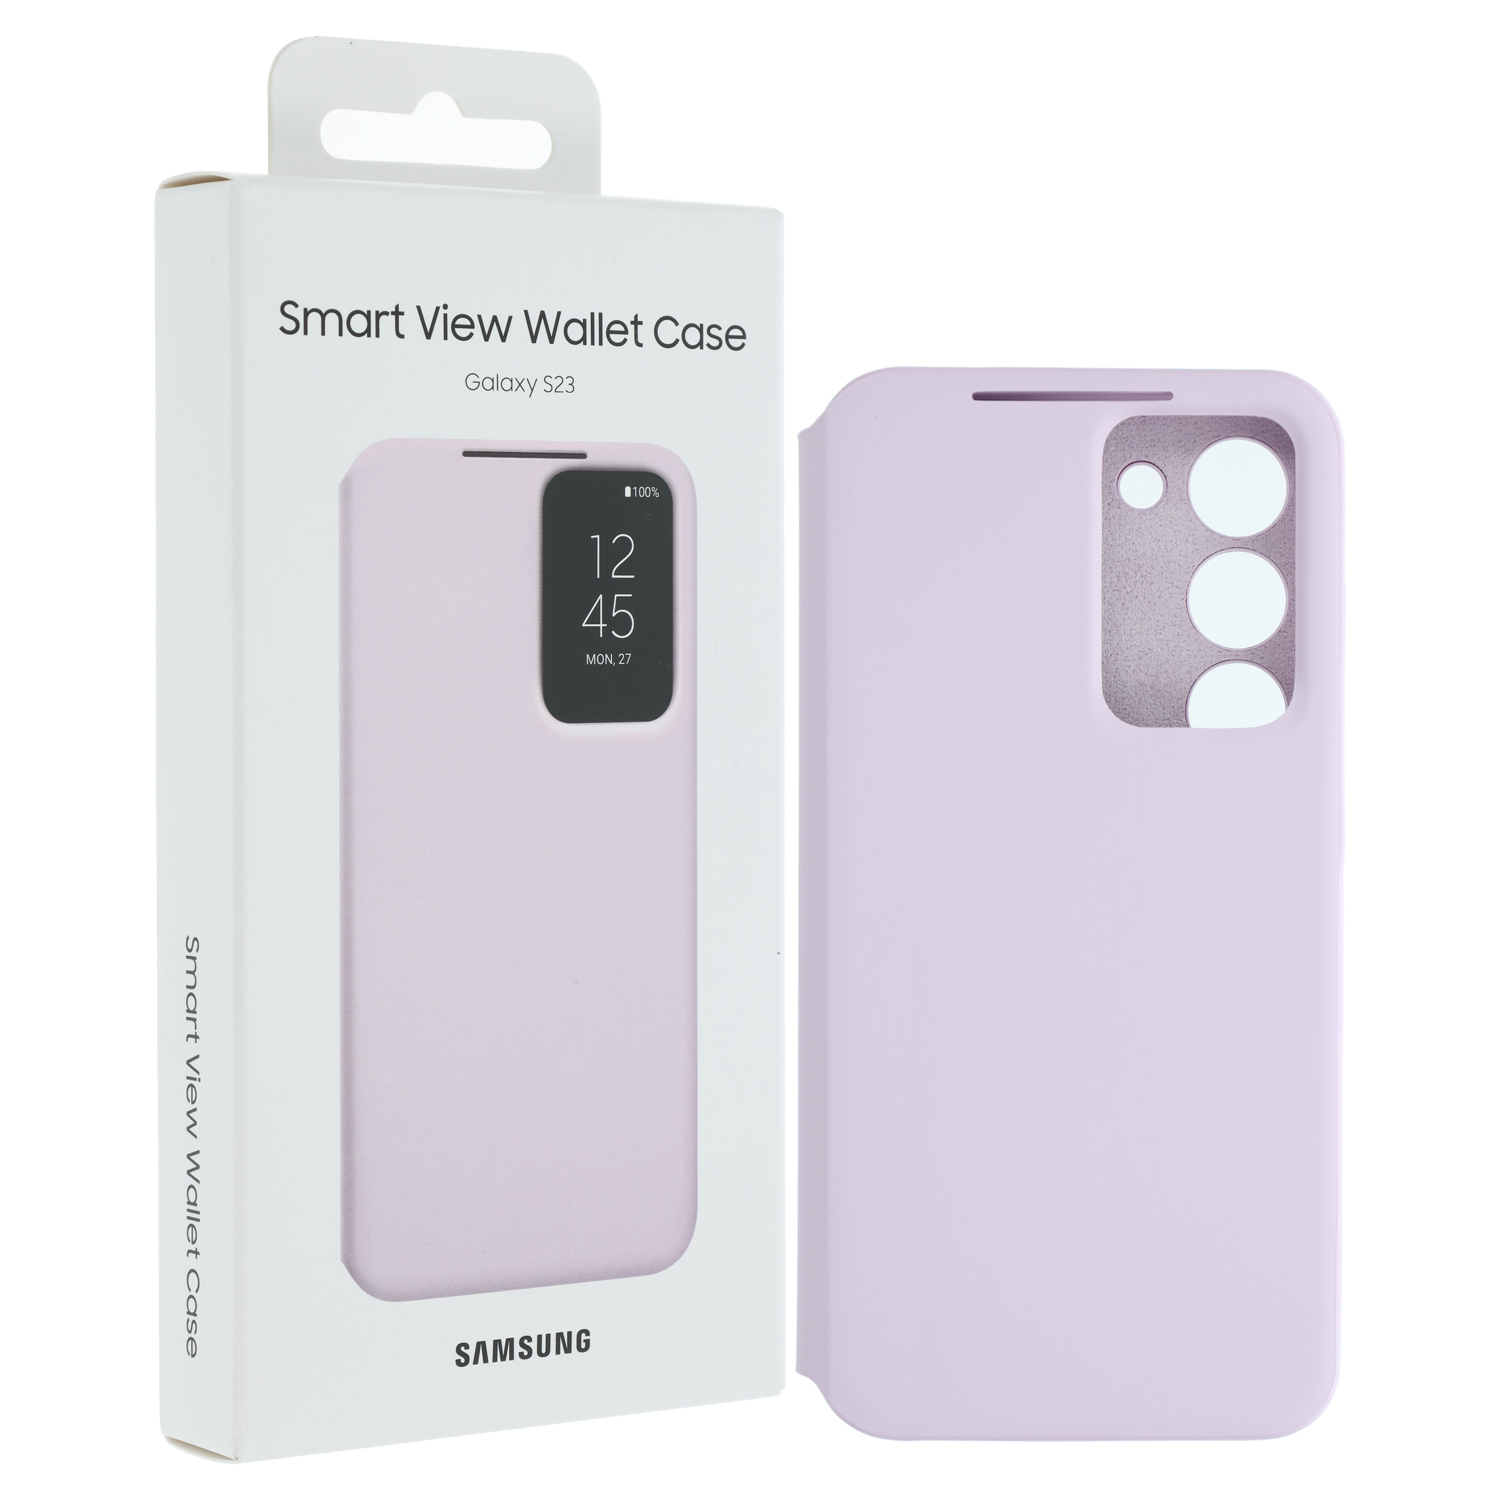 Samsung Galaxy S23 S911B Smart View Wallet Cover EF-ZS911CBEGWW, Lilac